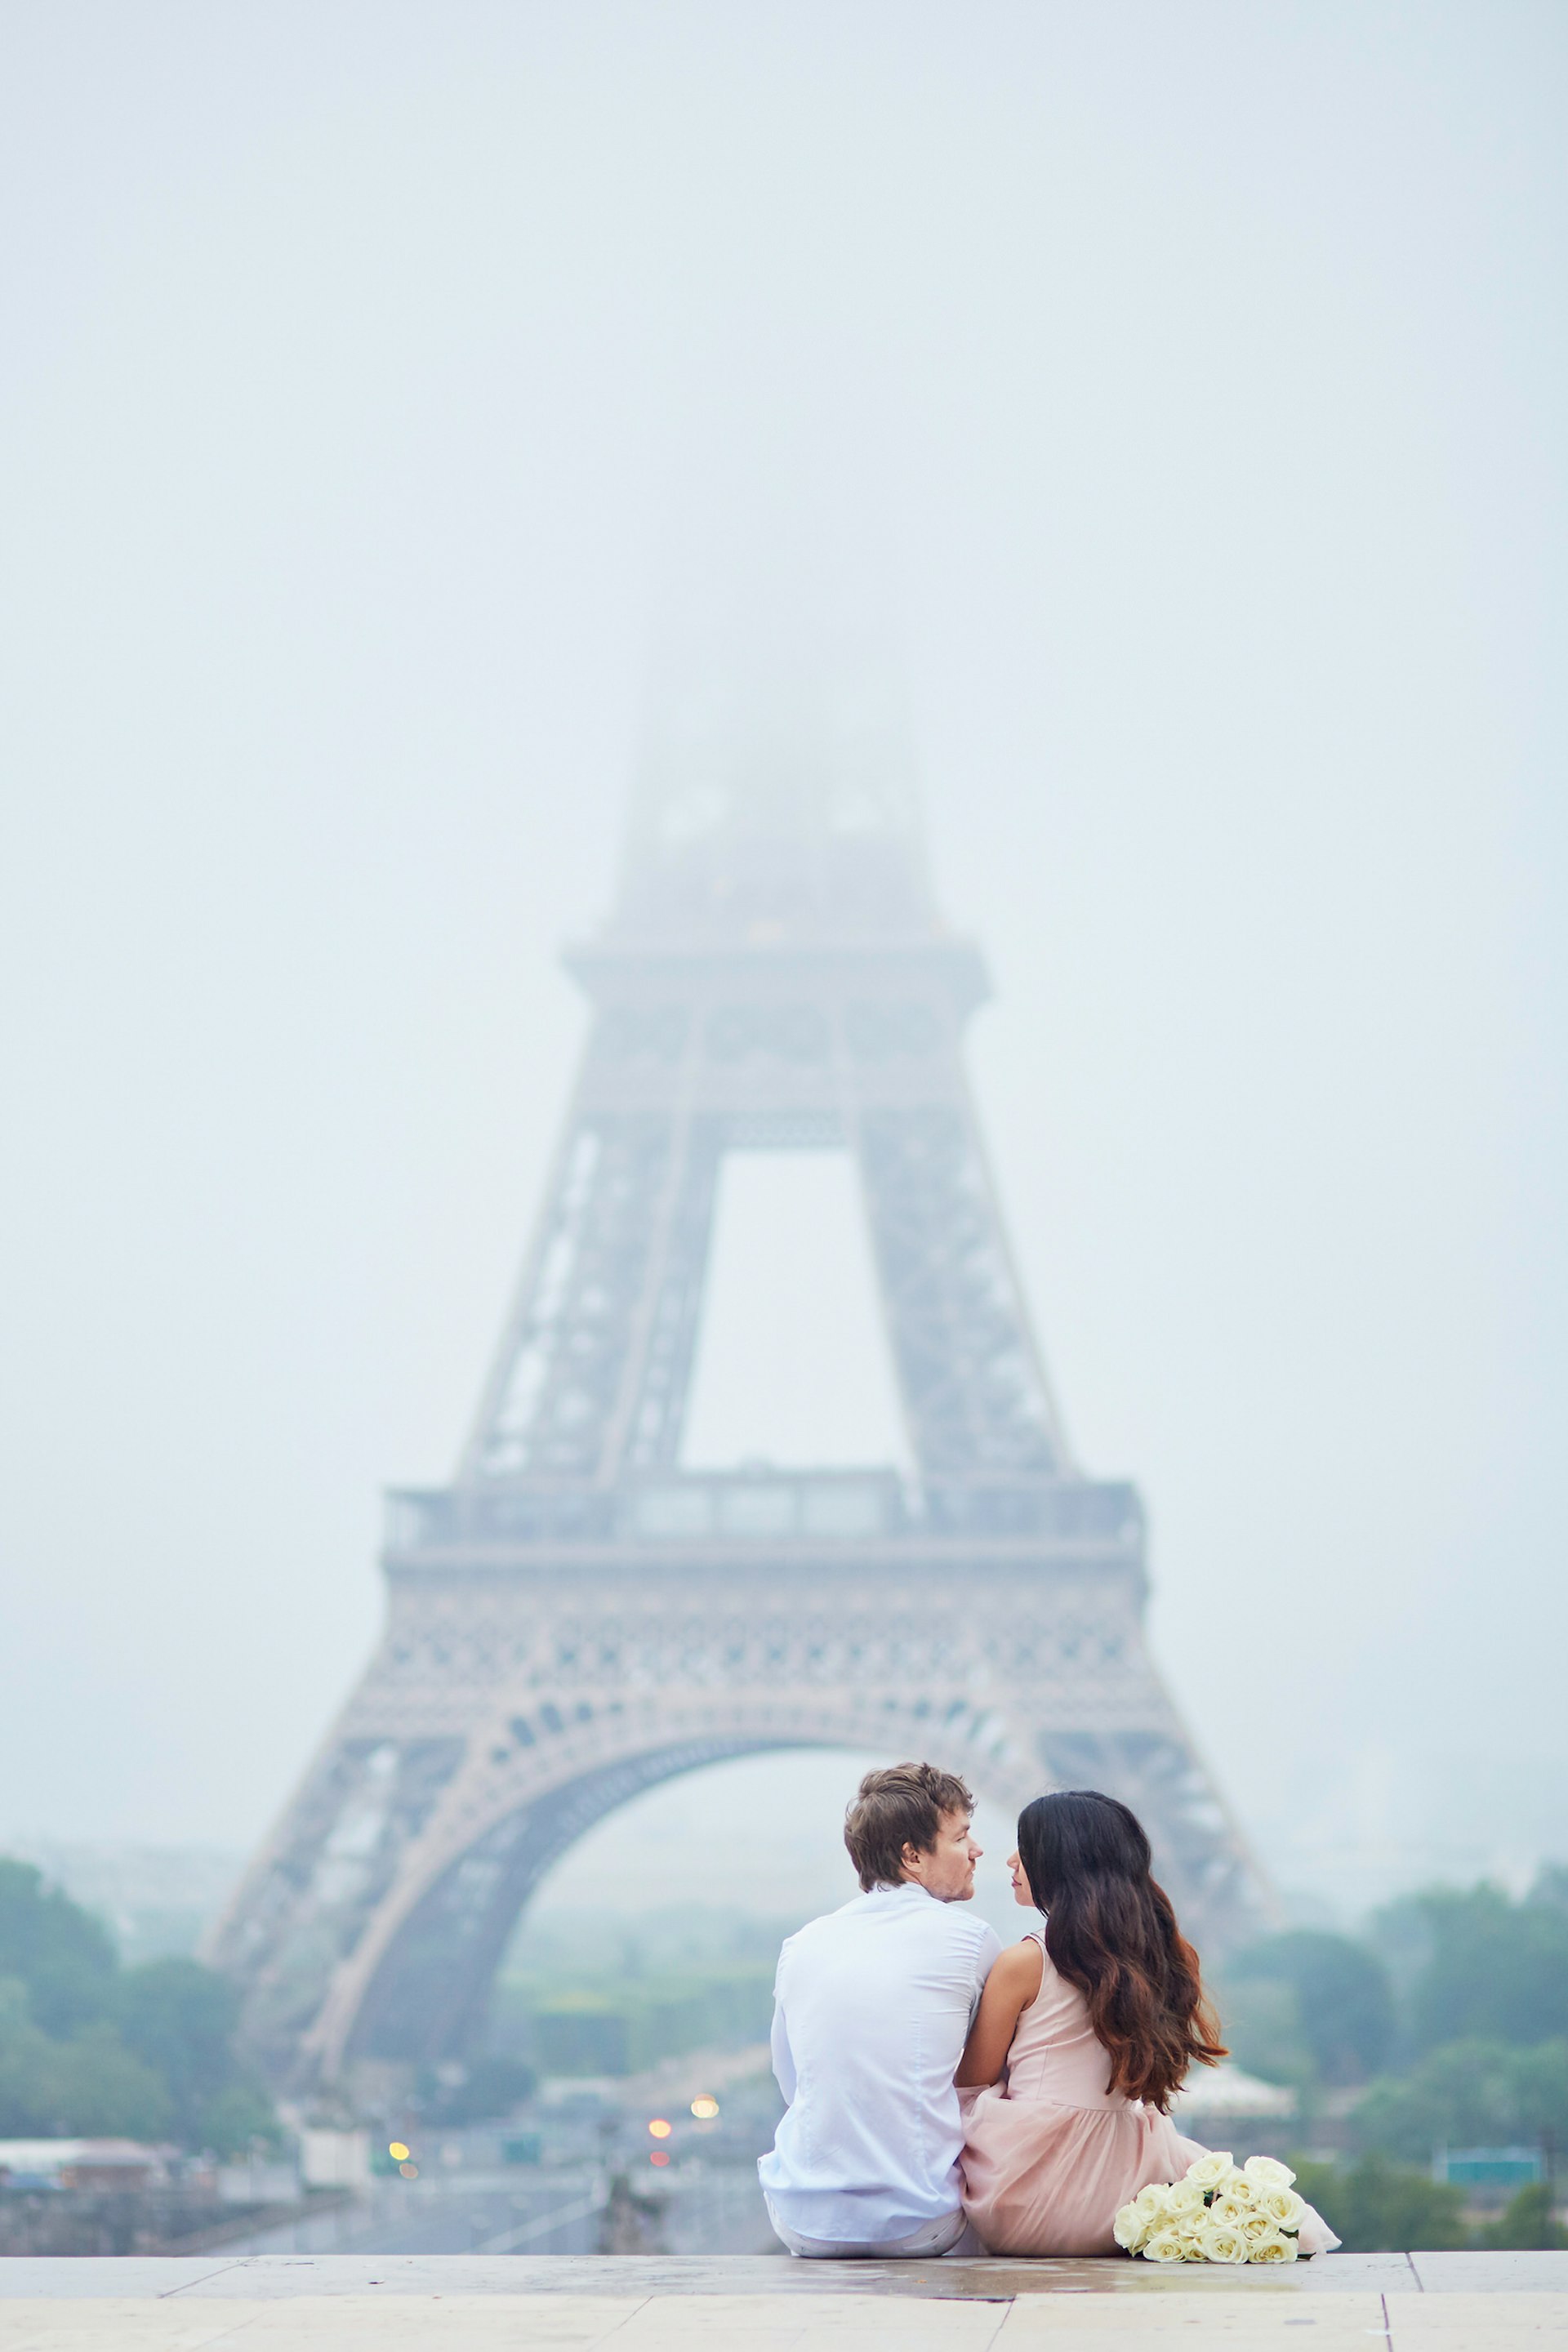 A couple post in front of the fog-shrouded Eiffel Tower.